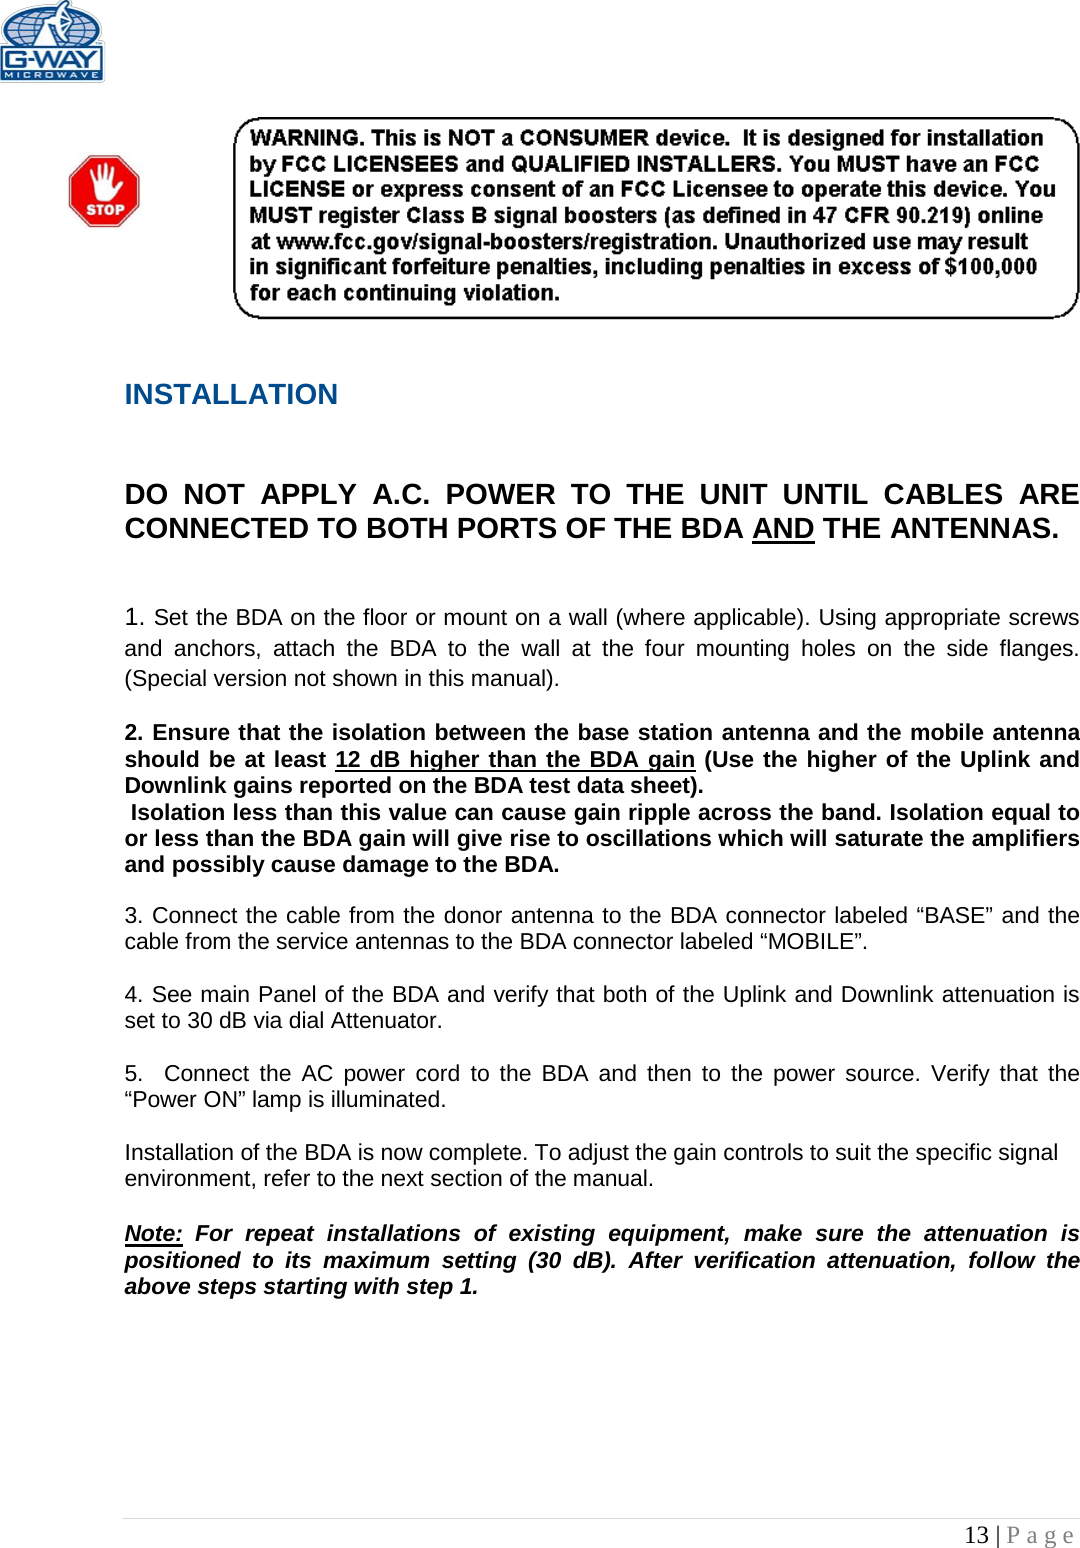   13 | Page    INSTALLATION   DO NOT APPLY A.C. POWER TO THE UNIT UNTIL CABLES ARE CONNECTED TO BOTH PORTS OF THE BDA AND THE ANTENNAS.    1. Set the BDA on the floor or mount on a wall (where applicable). Using appropriate screws and anchors, attach the BDA to the wall at the four mounting holes on the side flanges. (Special version not shown in this manual).  2. Ensure that the isolation between the base station antenna and the mobile antenna should be at least 12 dB higher than the BDA gain (Use the higher of the Uplink and Downlink gains reported on the BDA test data sheet).  Isolation less than this value can cause gain ripple across the band. Isolation equal to or less than the BDA gain will give rise to oscillations which will saturate the amplifiers and possibly cause damage to the BDA.   3. Connect the cable from the donor antenna to the BDA connector labeled “BASE” and the cable from the service antennas to the BDA connector labeled “MOBILE”.  4. See main Panel of the BDA and verify that both of the Uplink and Downlink attenuation is set to 30 dB via dial Attenuator.    5.  Connect the AC power cord to the BDA and then to the power source. Verify that the “Power ON” lamp is illuminated.   Installation of the BDA is now complete. To adjust the gain controls to suit the specific signal environment, refer to the next section of the manual.  Note: For repeat installations of existing equipment, make sure the attenuation is positioned to its maximum setting (30 dB). After verification attenuation, follow the above steps starting with step 1.      